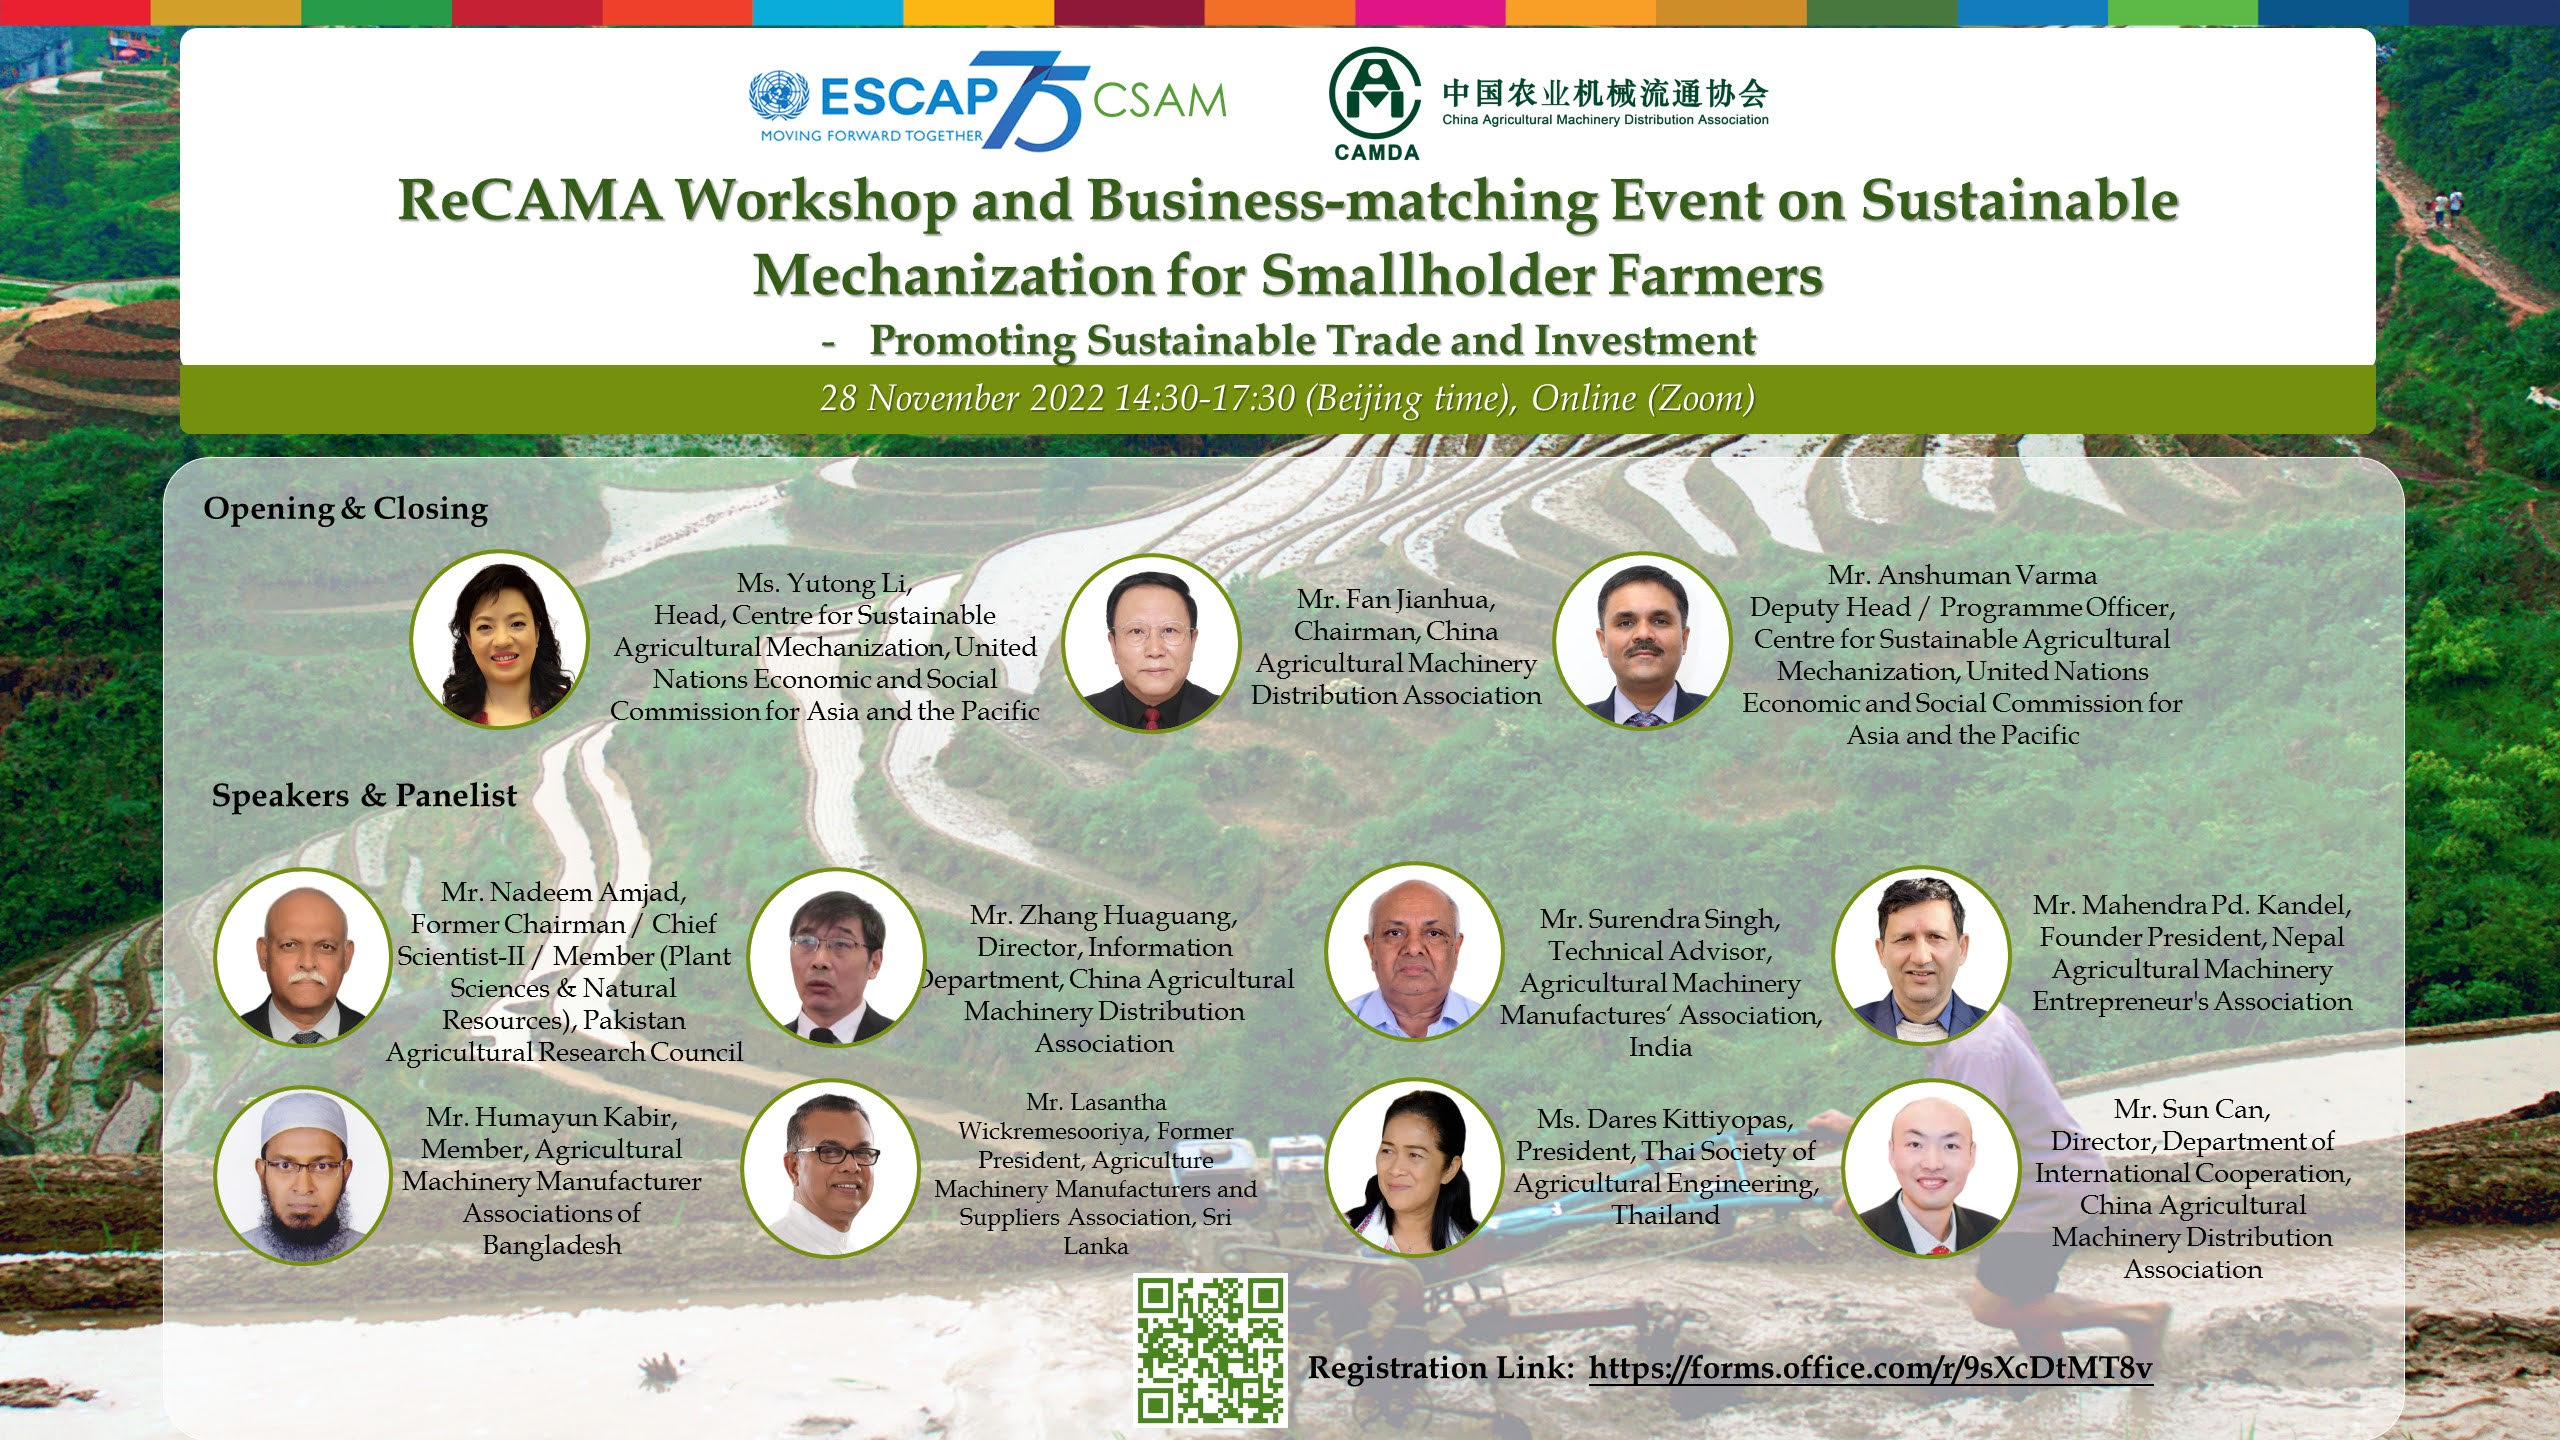 ReCAMA Workshop and Business-matching Event on Sustainable Mechanization for Smallholder Farmers